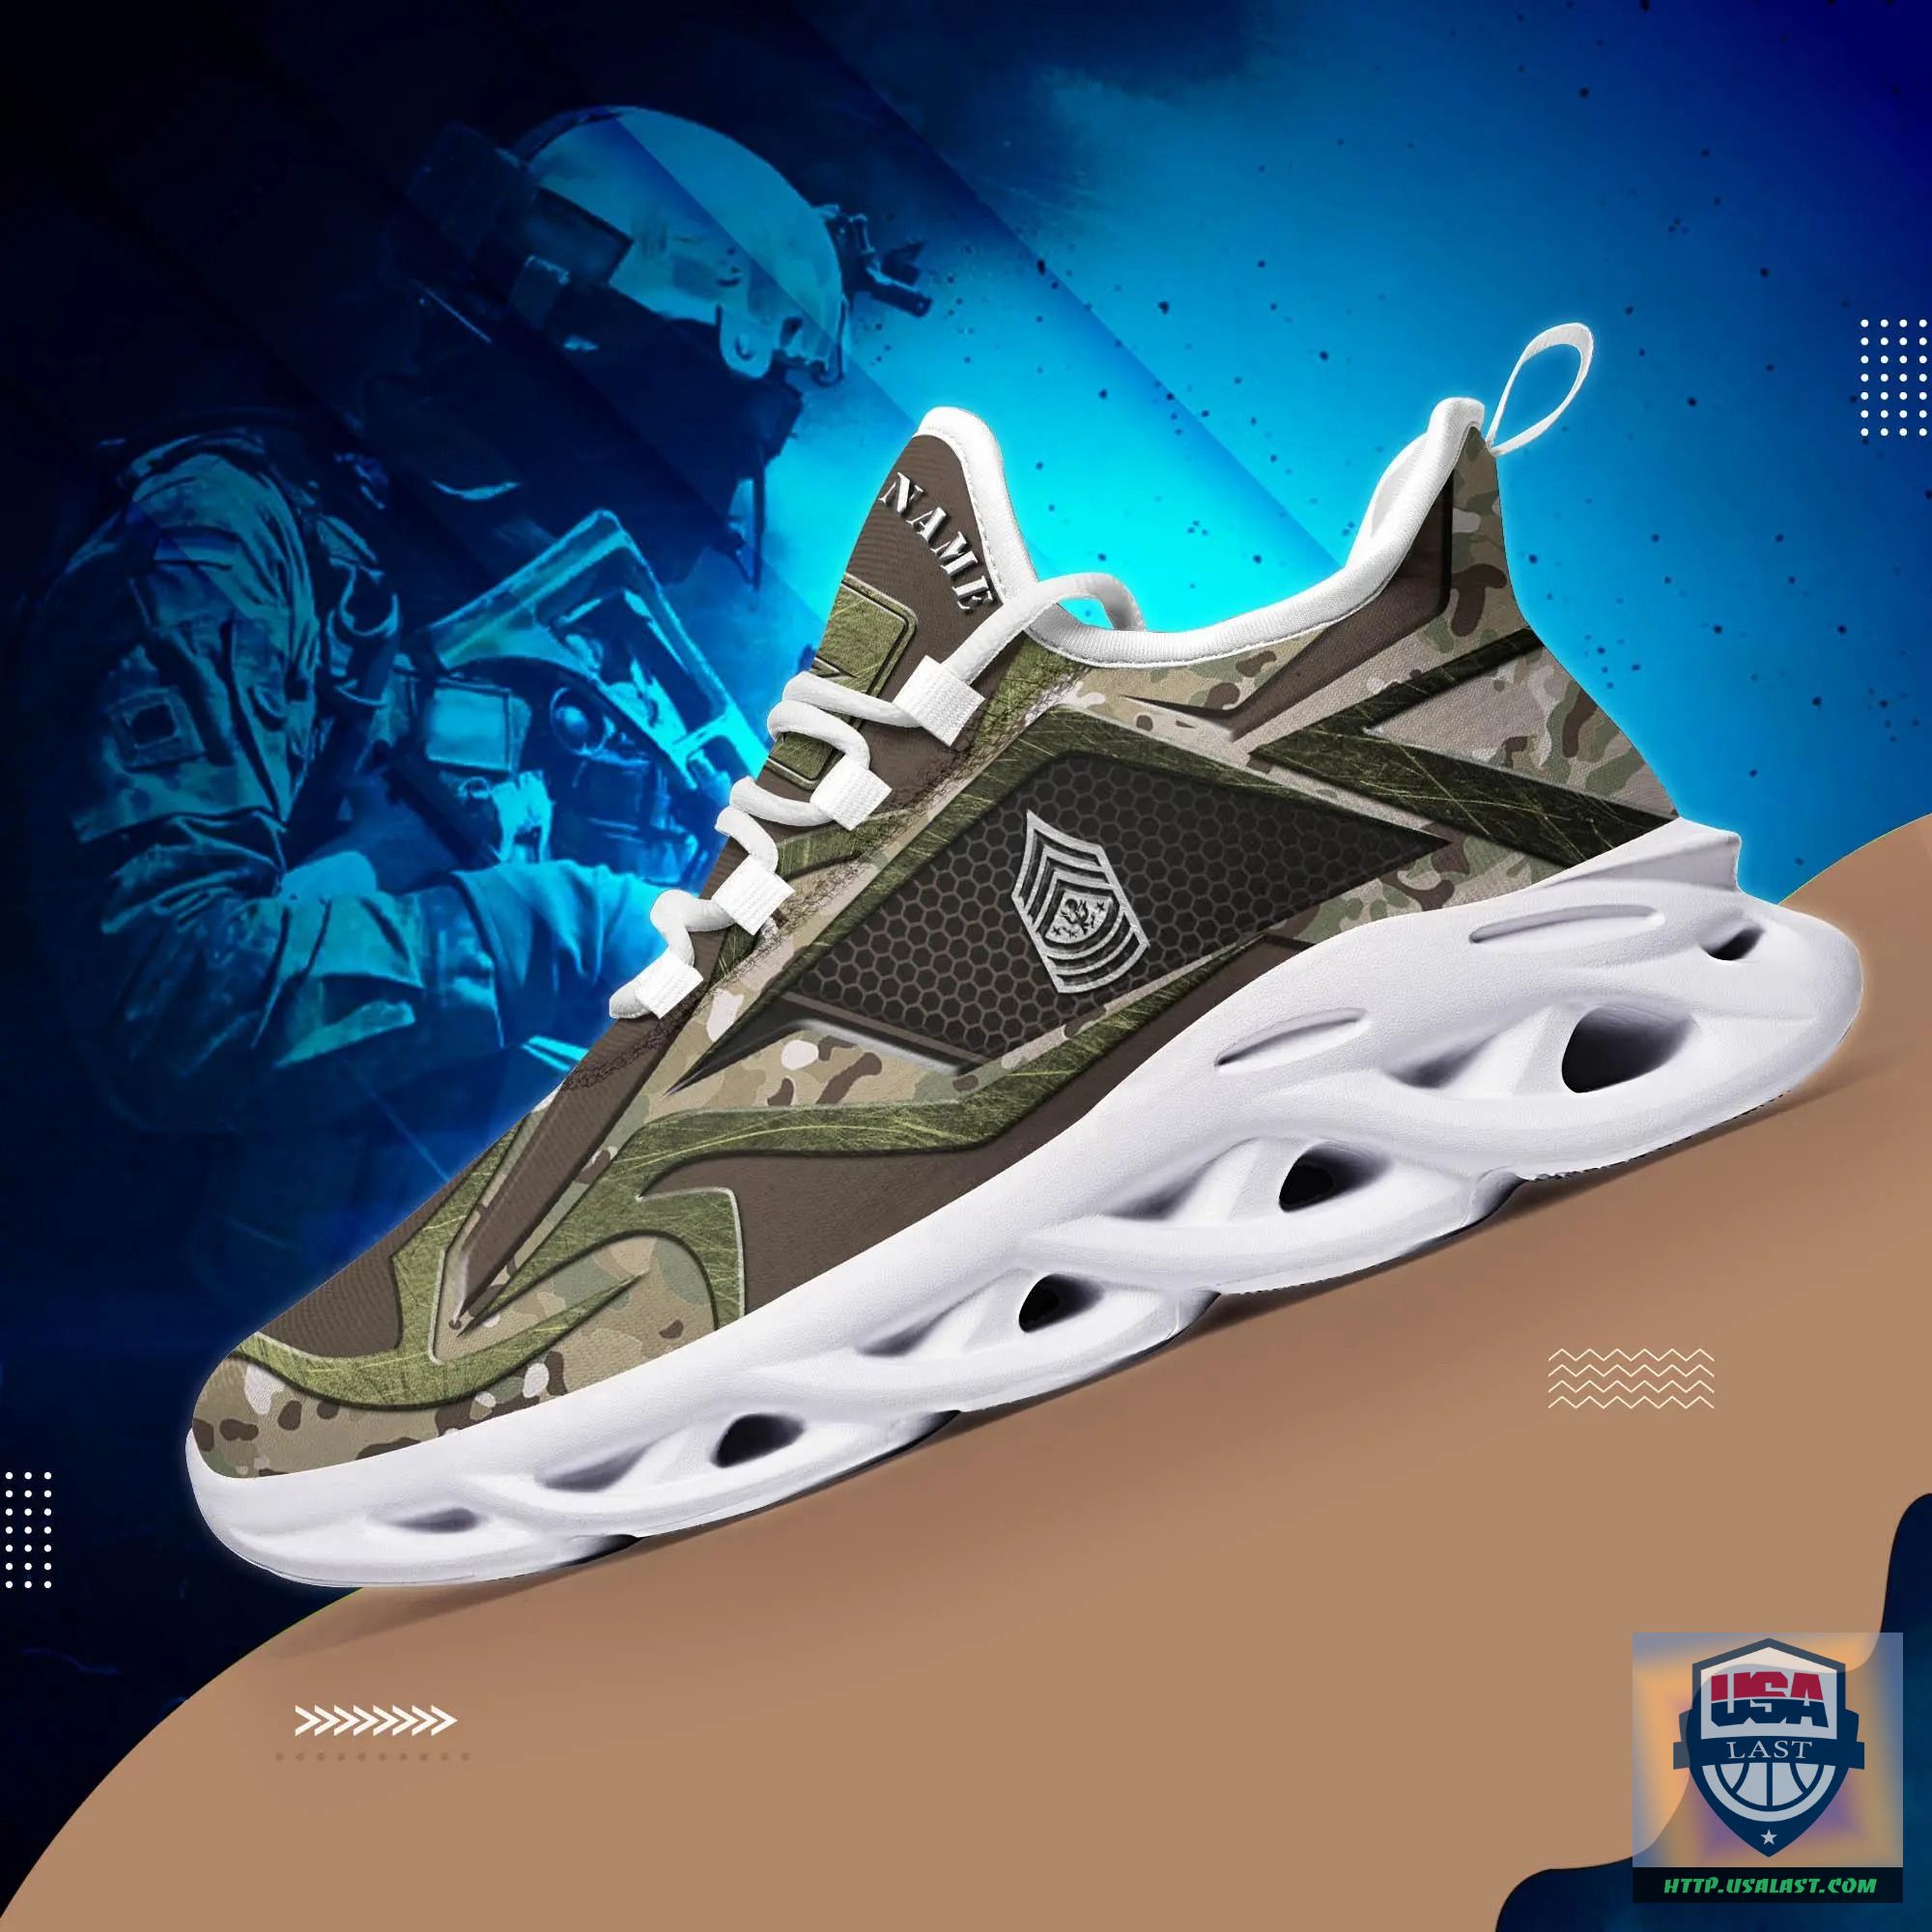 Amazon U.S Army Sneakers Custom Name And Rank Max Soul Shoes